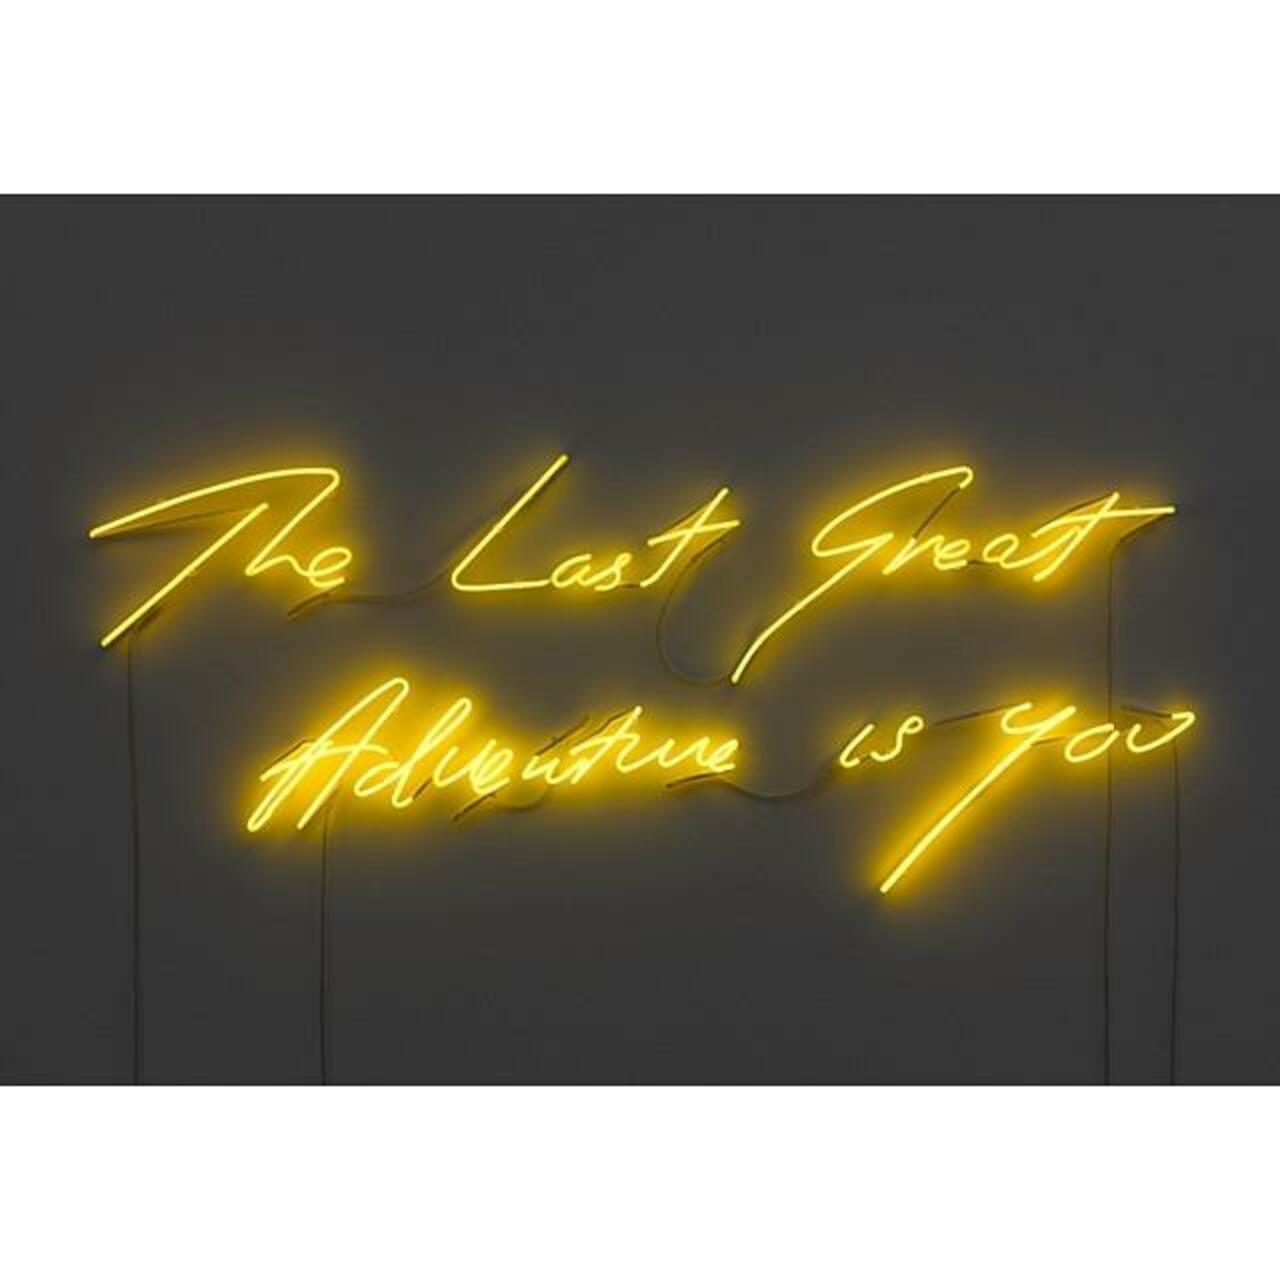 Love this Tracey Emin, edless classic. #mode #modecollective #nottinghill #club #art #music #london #picoftheday ... http://t.co/6sys4YDWAX